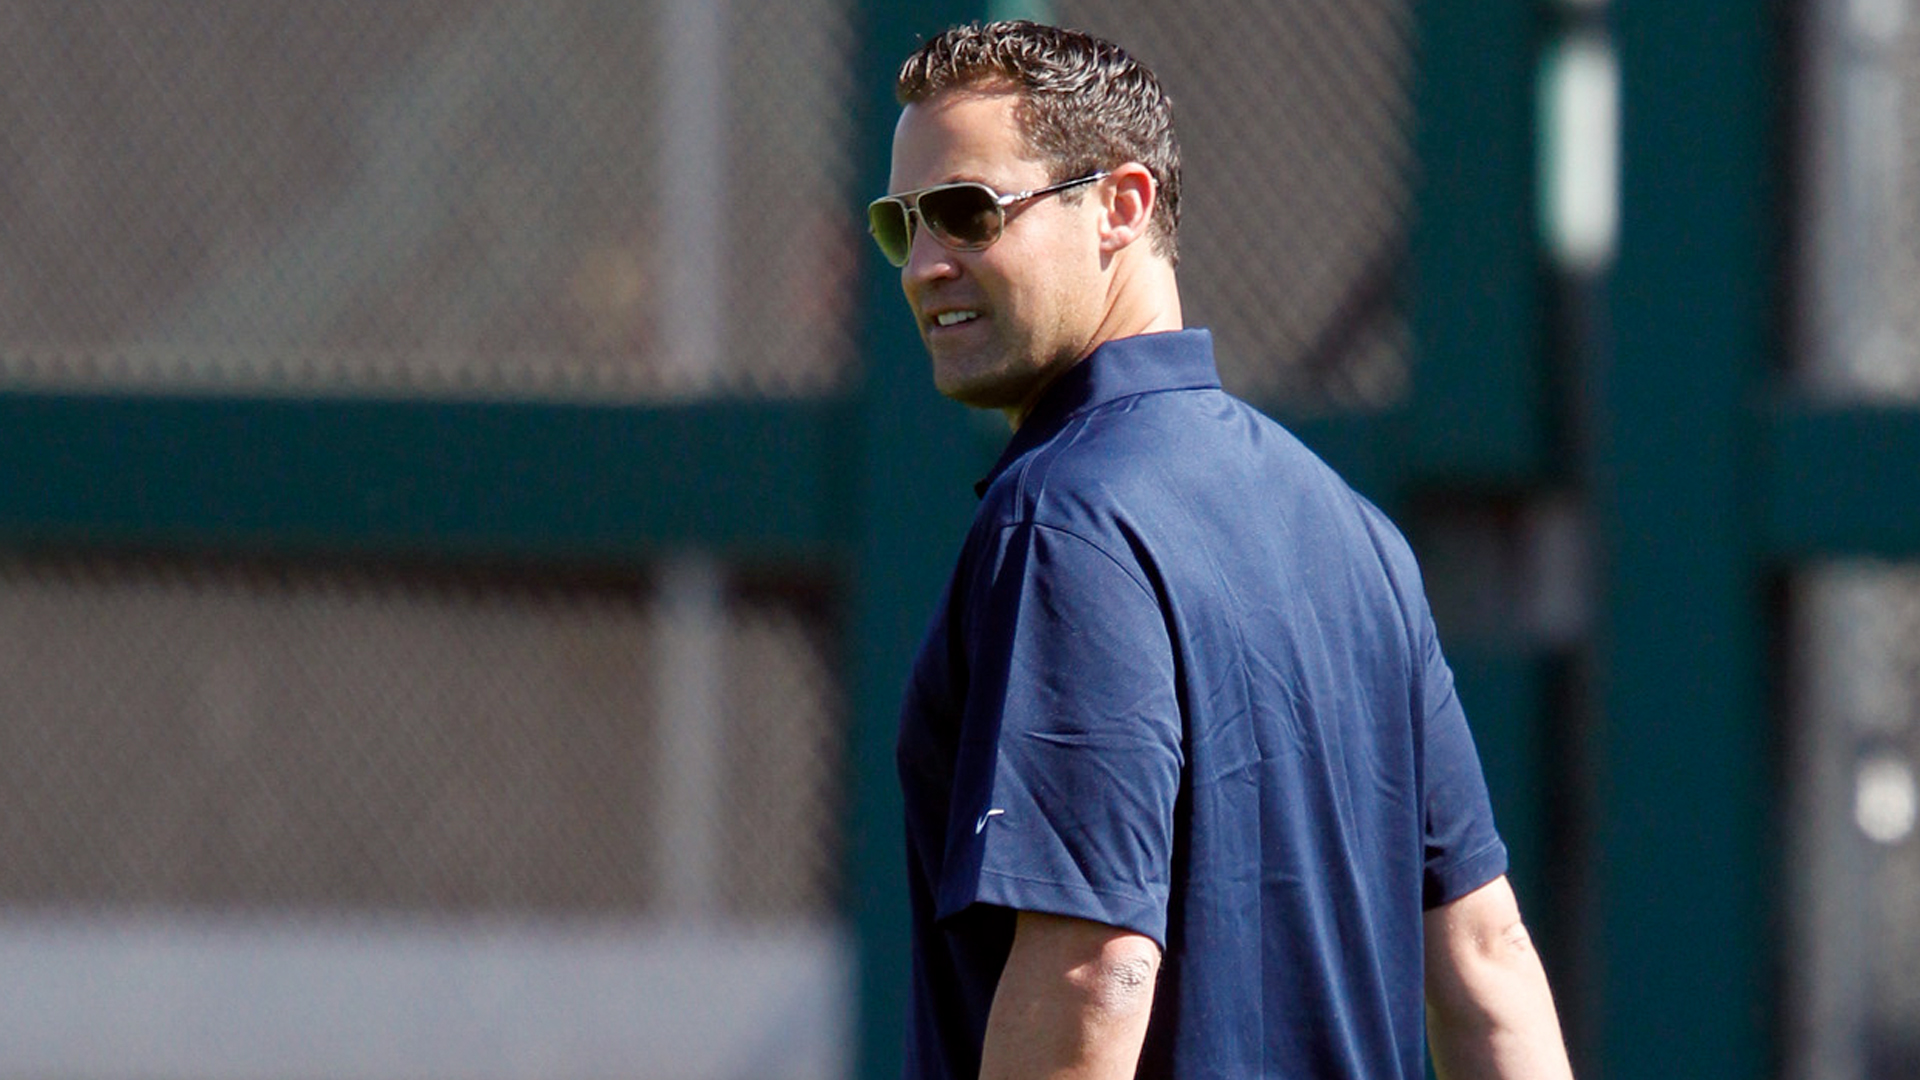 Why Luis Matos is Giants prospect Pat Burrell loves to rave about